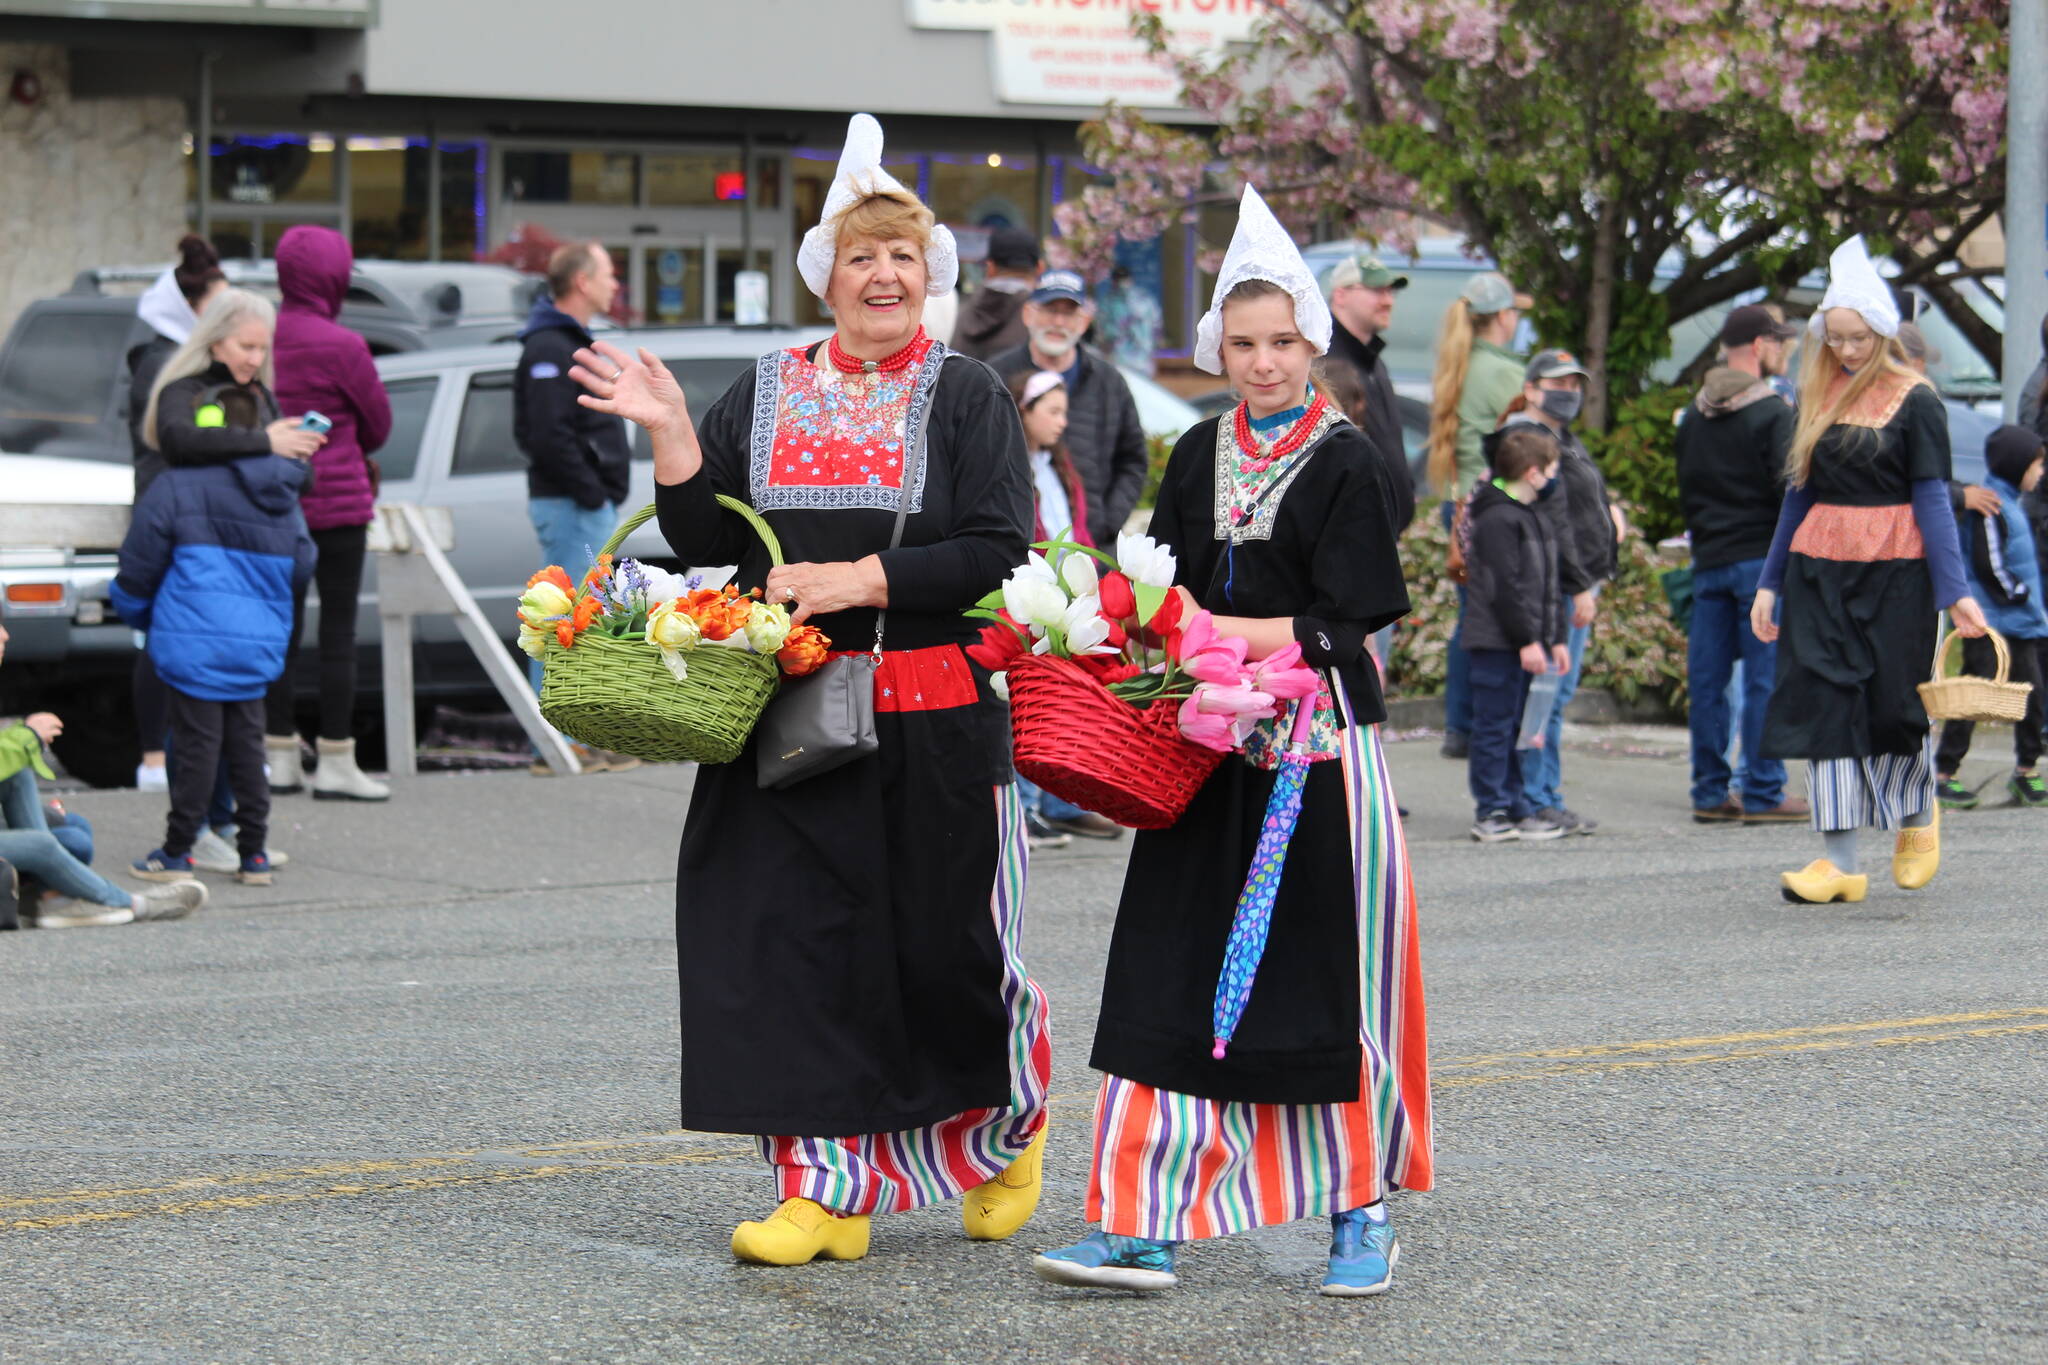 The Holland Happening parade celebrated Oak Harbor’s Dutch heritage April 30. (Photo by Karina Andrew/Whidbey News-Times)